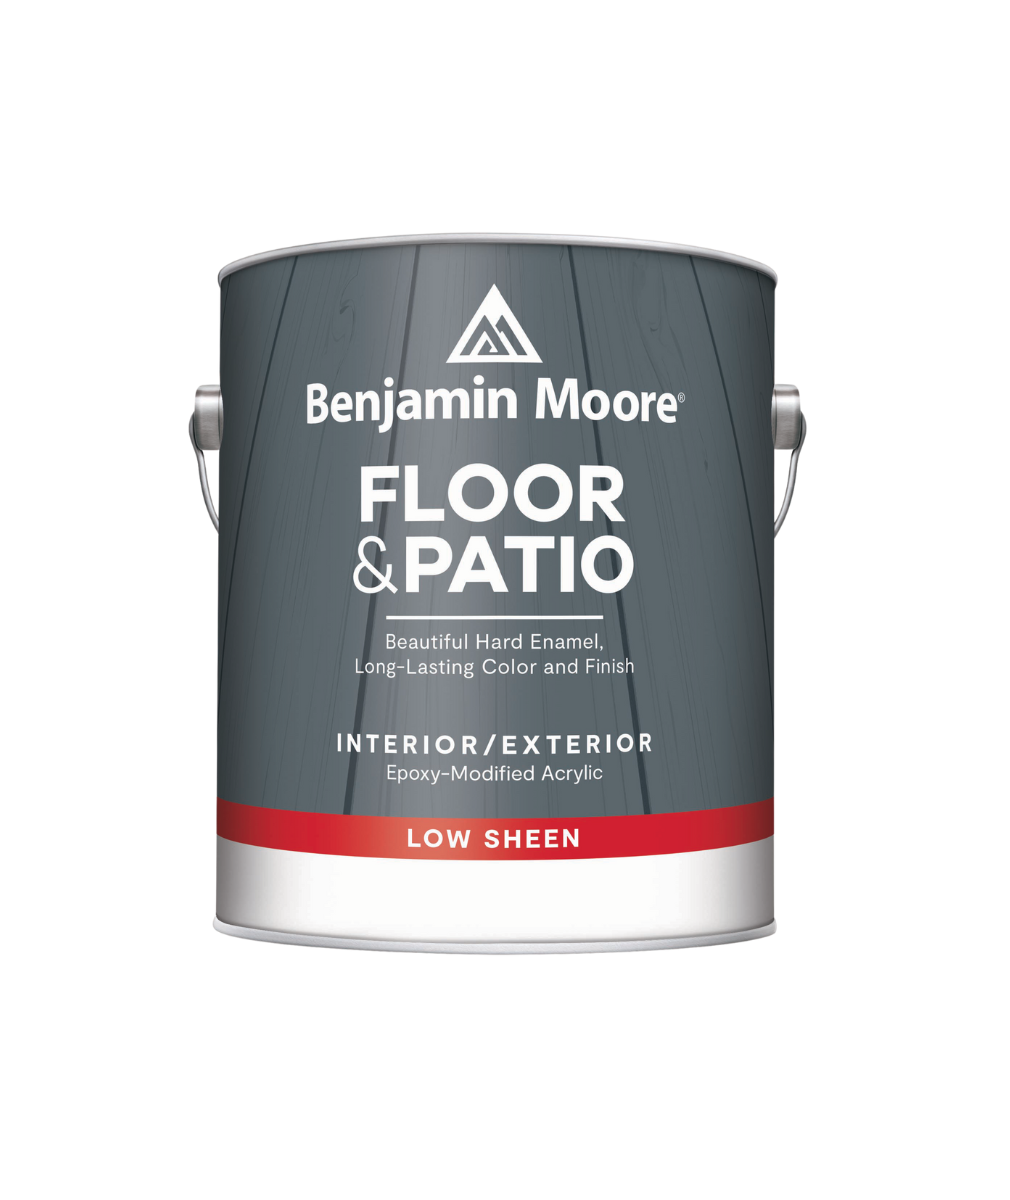 Benjamin Moore floor and patio low sheen Interior Paint , available at Johnson Paint & Maine Paint in MA, NH & ME.